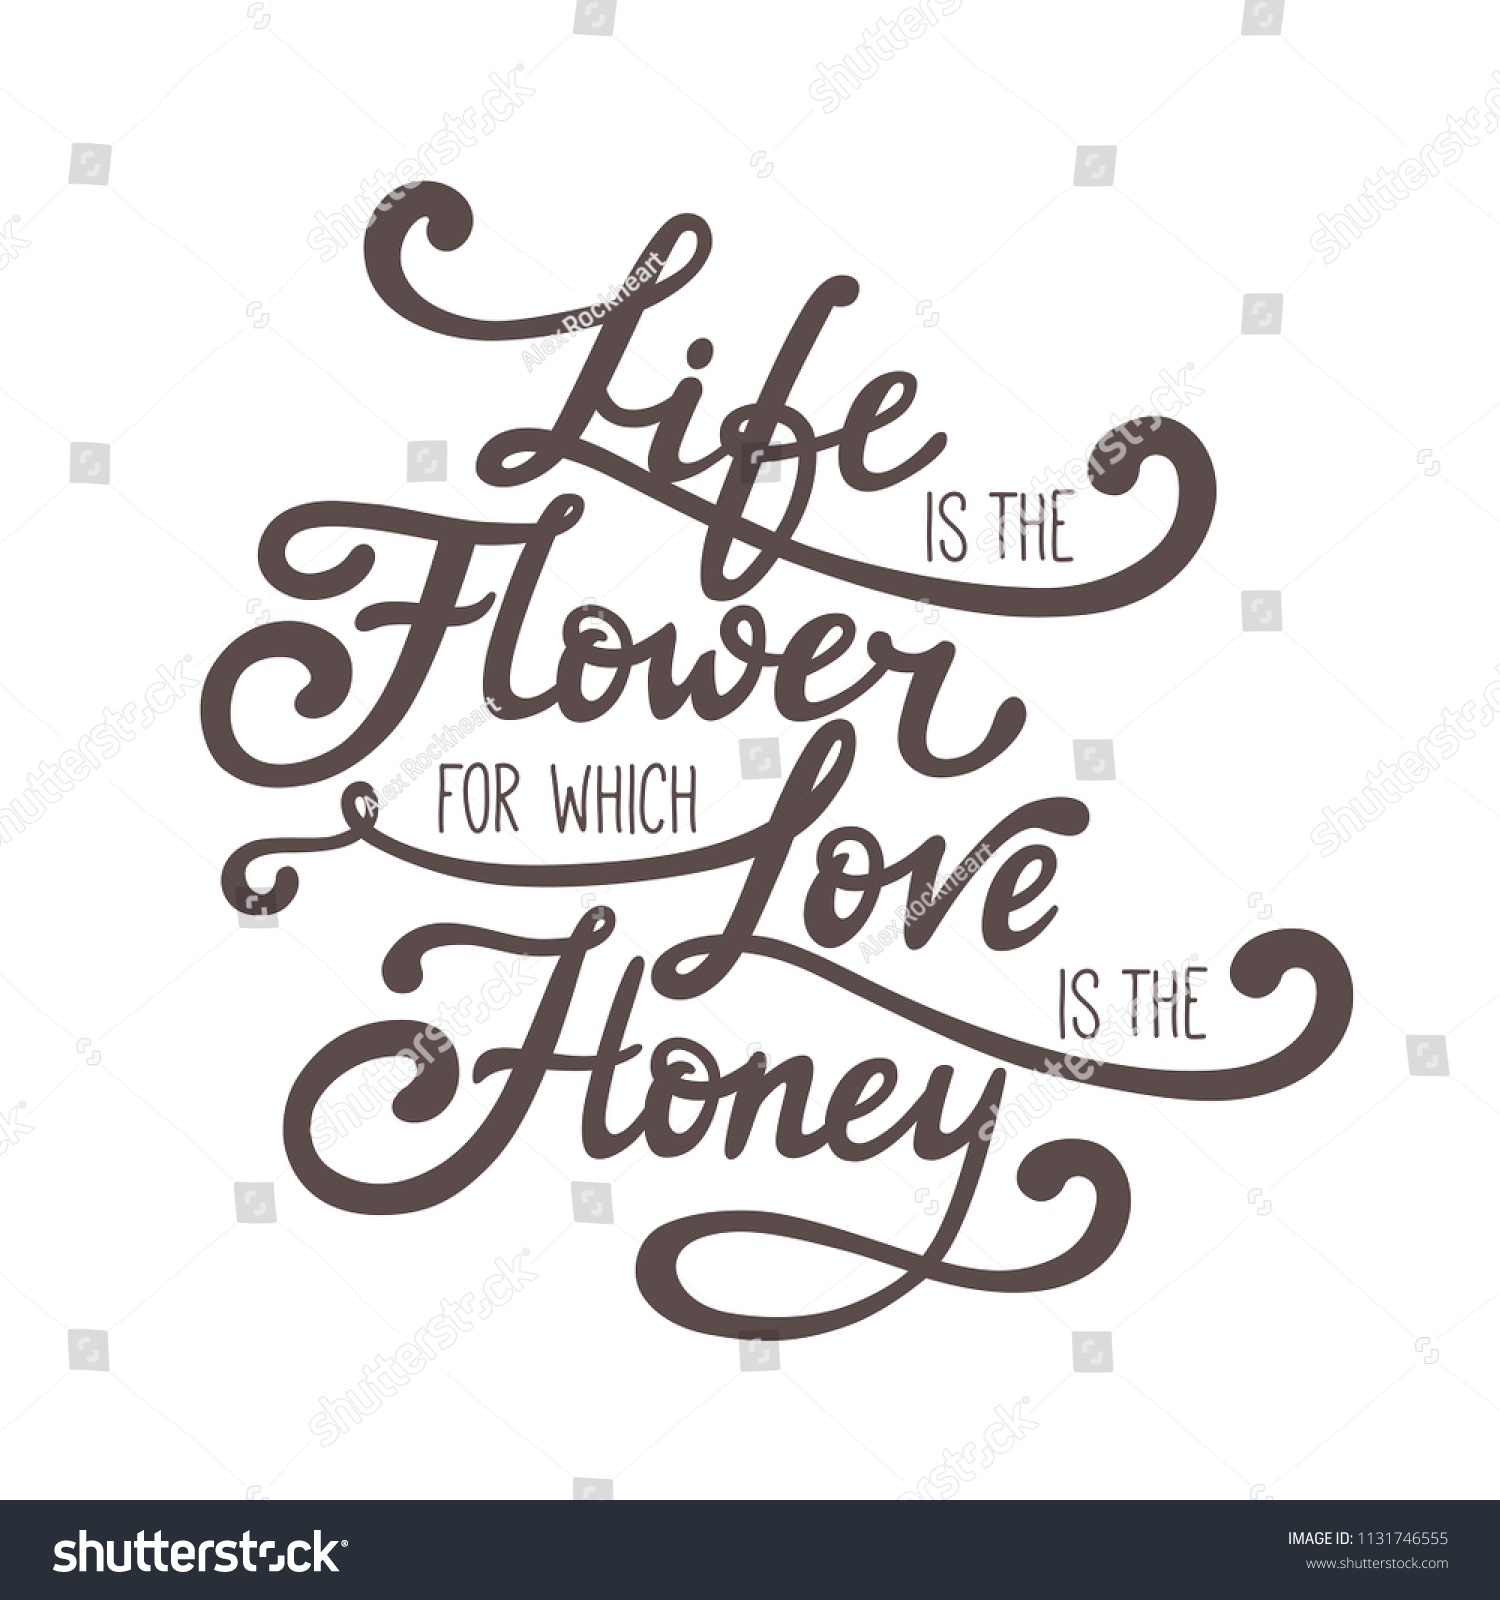 Life Flower Which Love Honey Hand Stock Vector Royalty Free